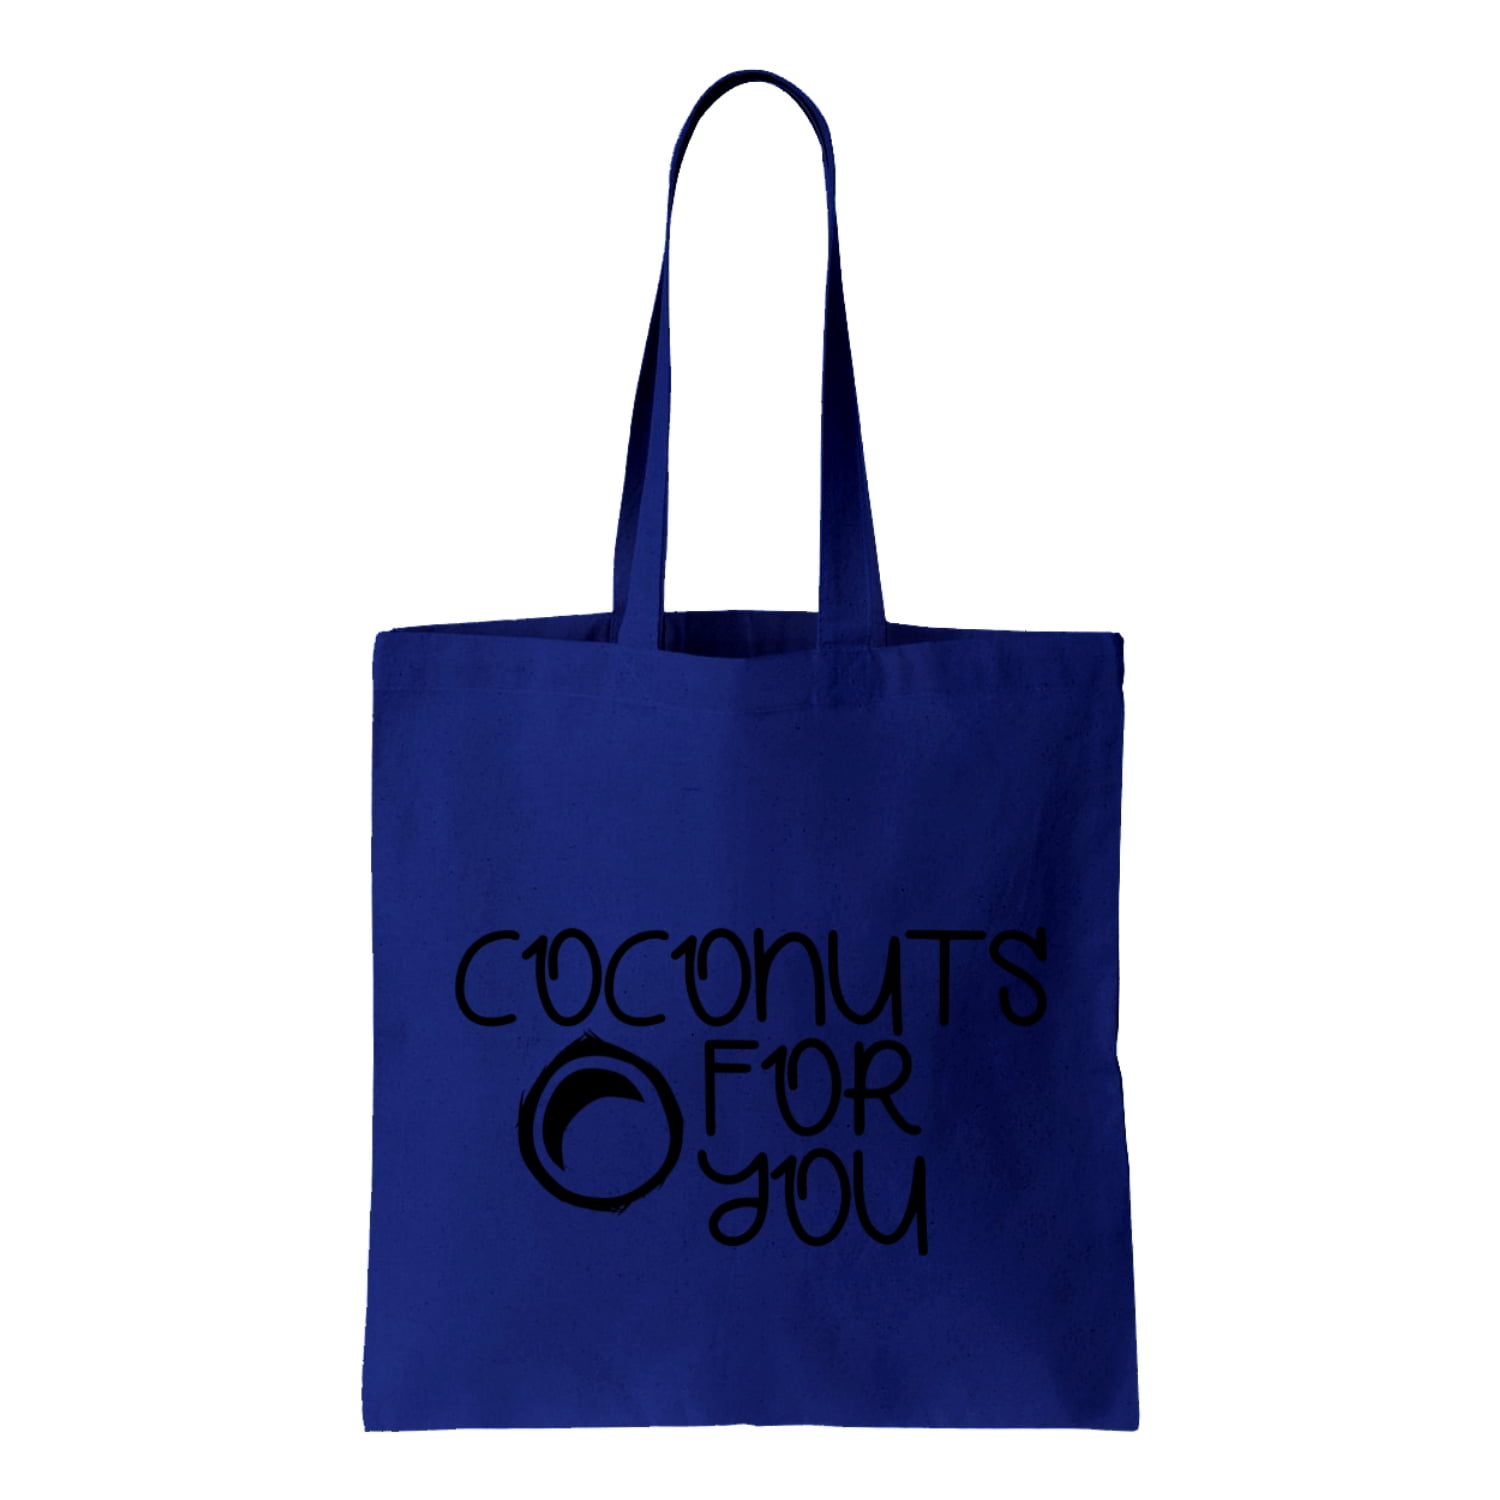 Coconuts For You, Fuit Puns, Cotton Canvas Re-Usable Shopping & Carry ...